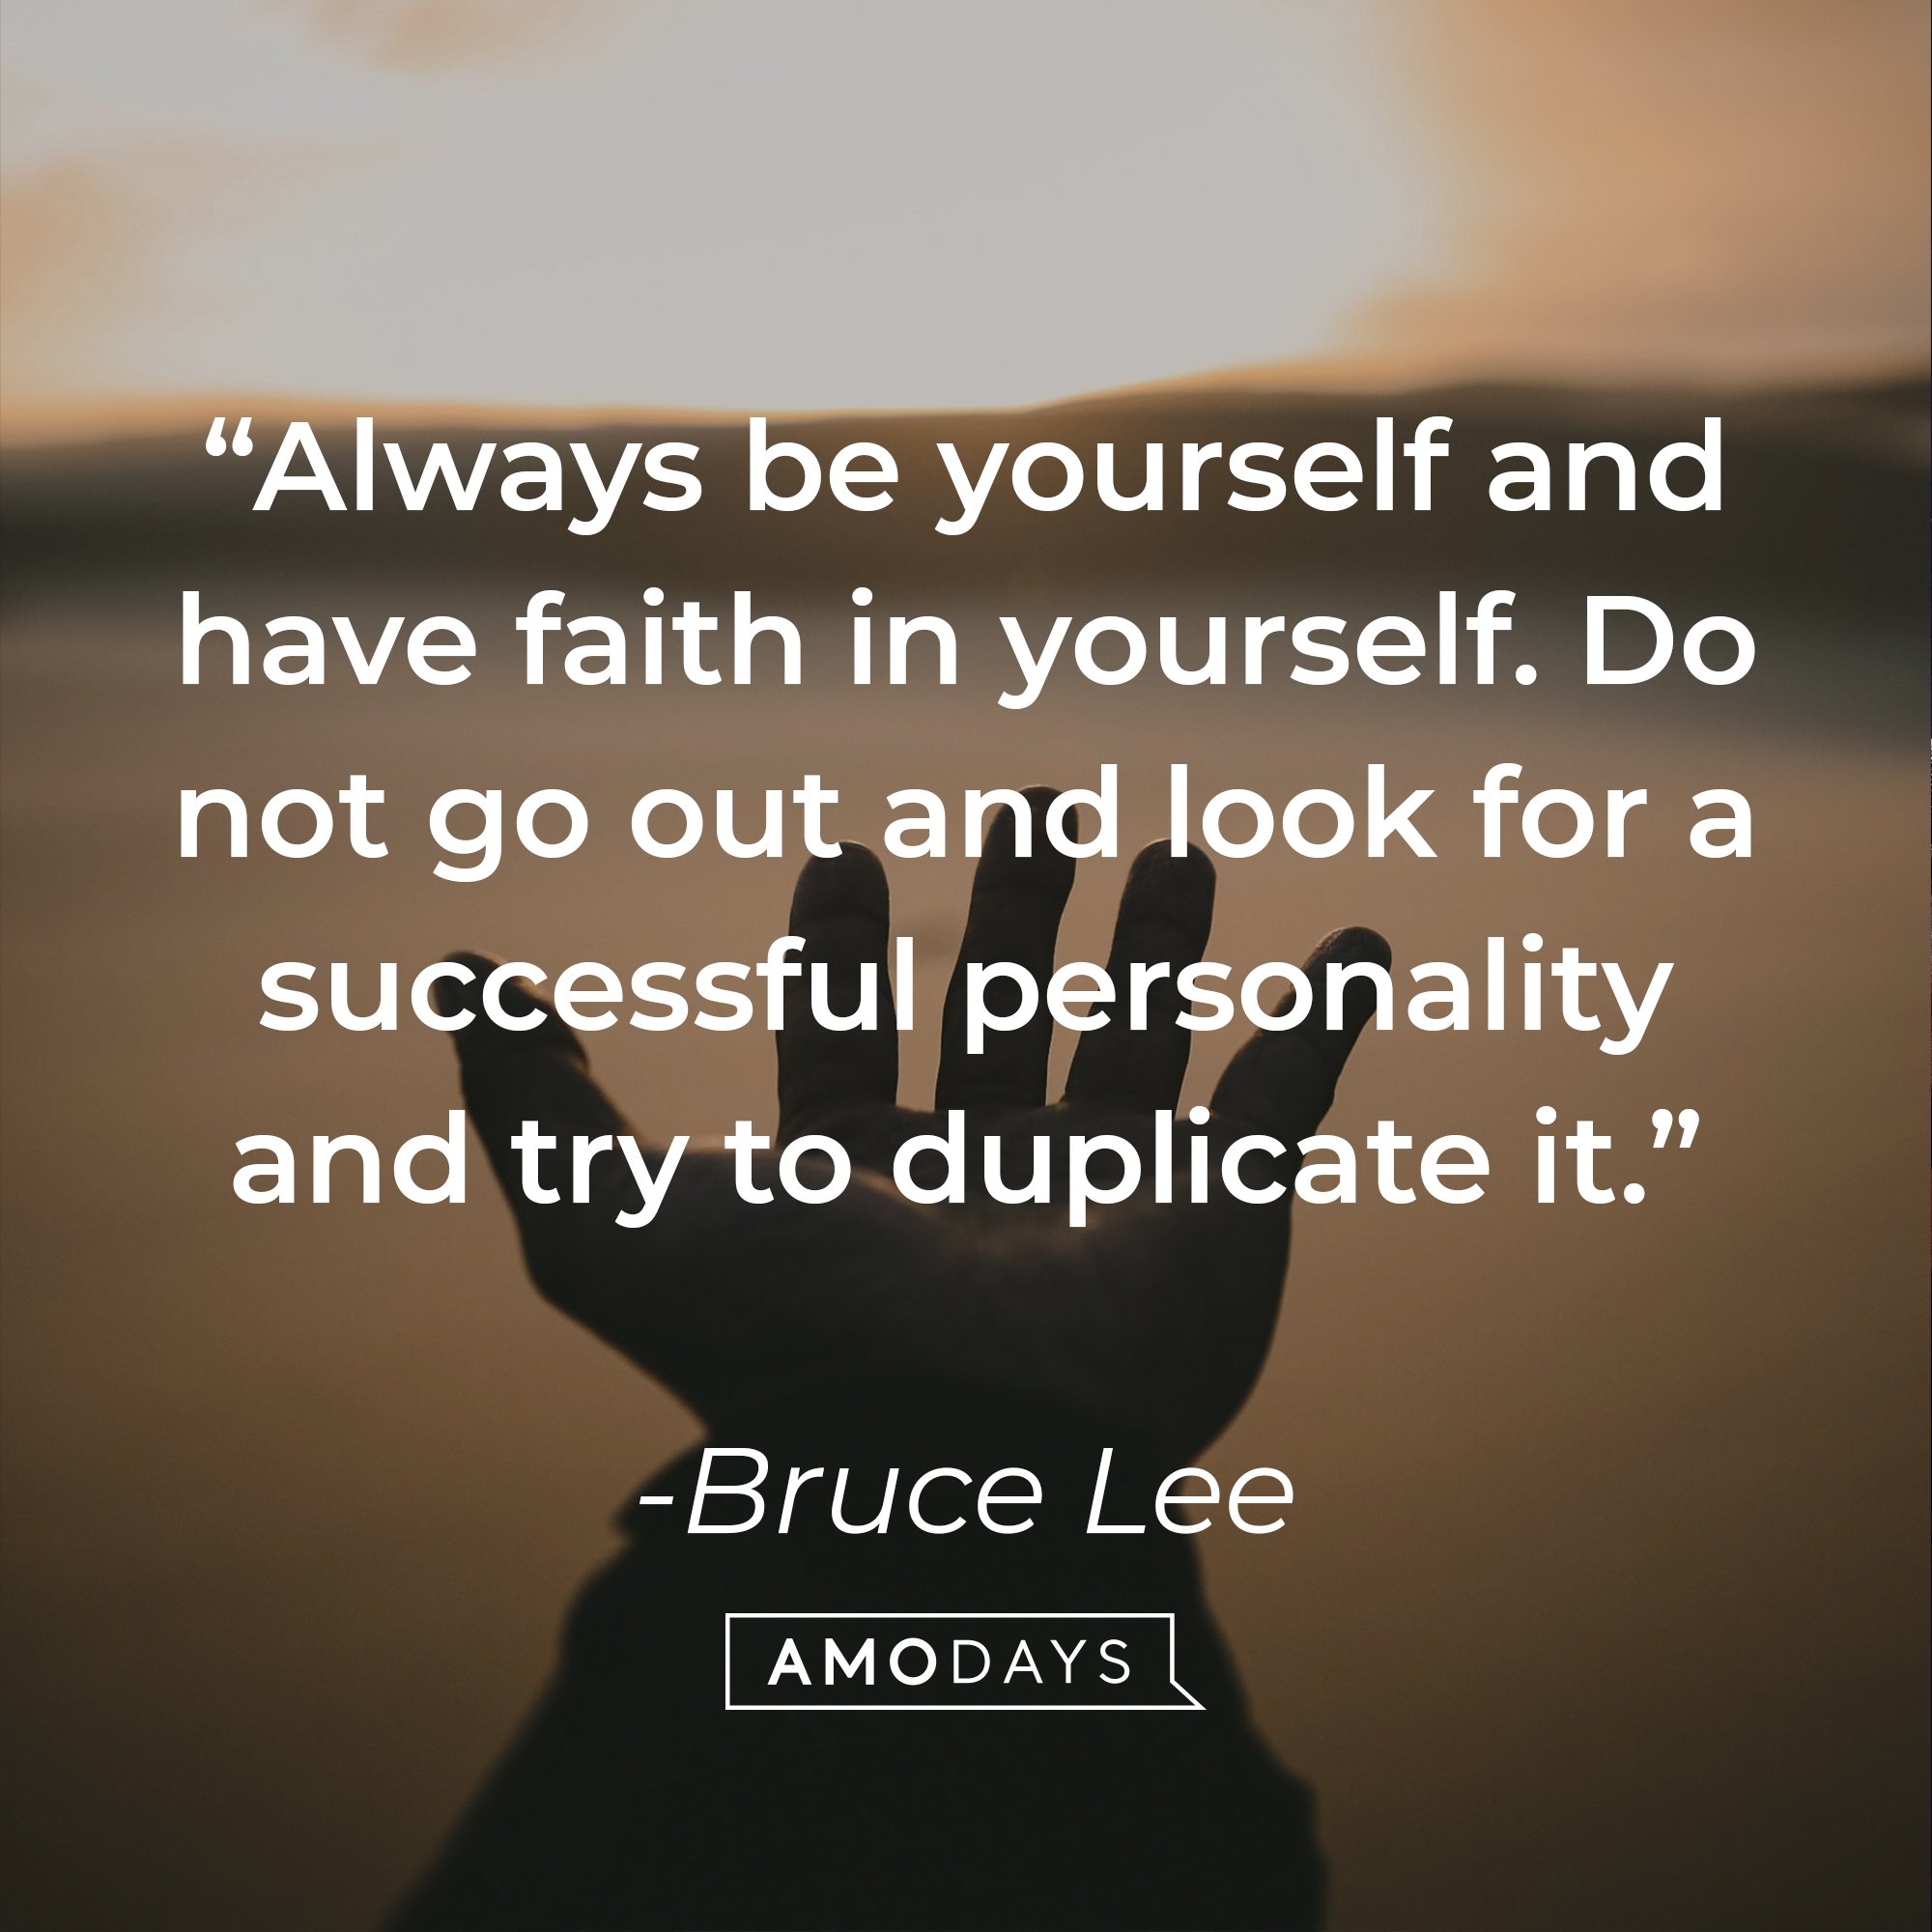  Bruce Lee's quote: “Always be yourself and have faith in yourself. Do not go out and look for a successful personality and try to duplicate it.” | Image: AmoDays